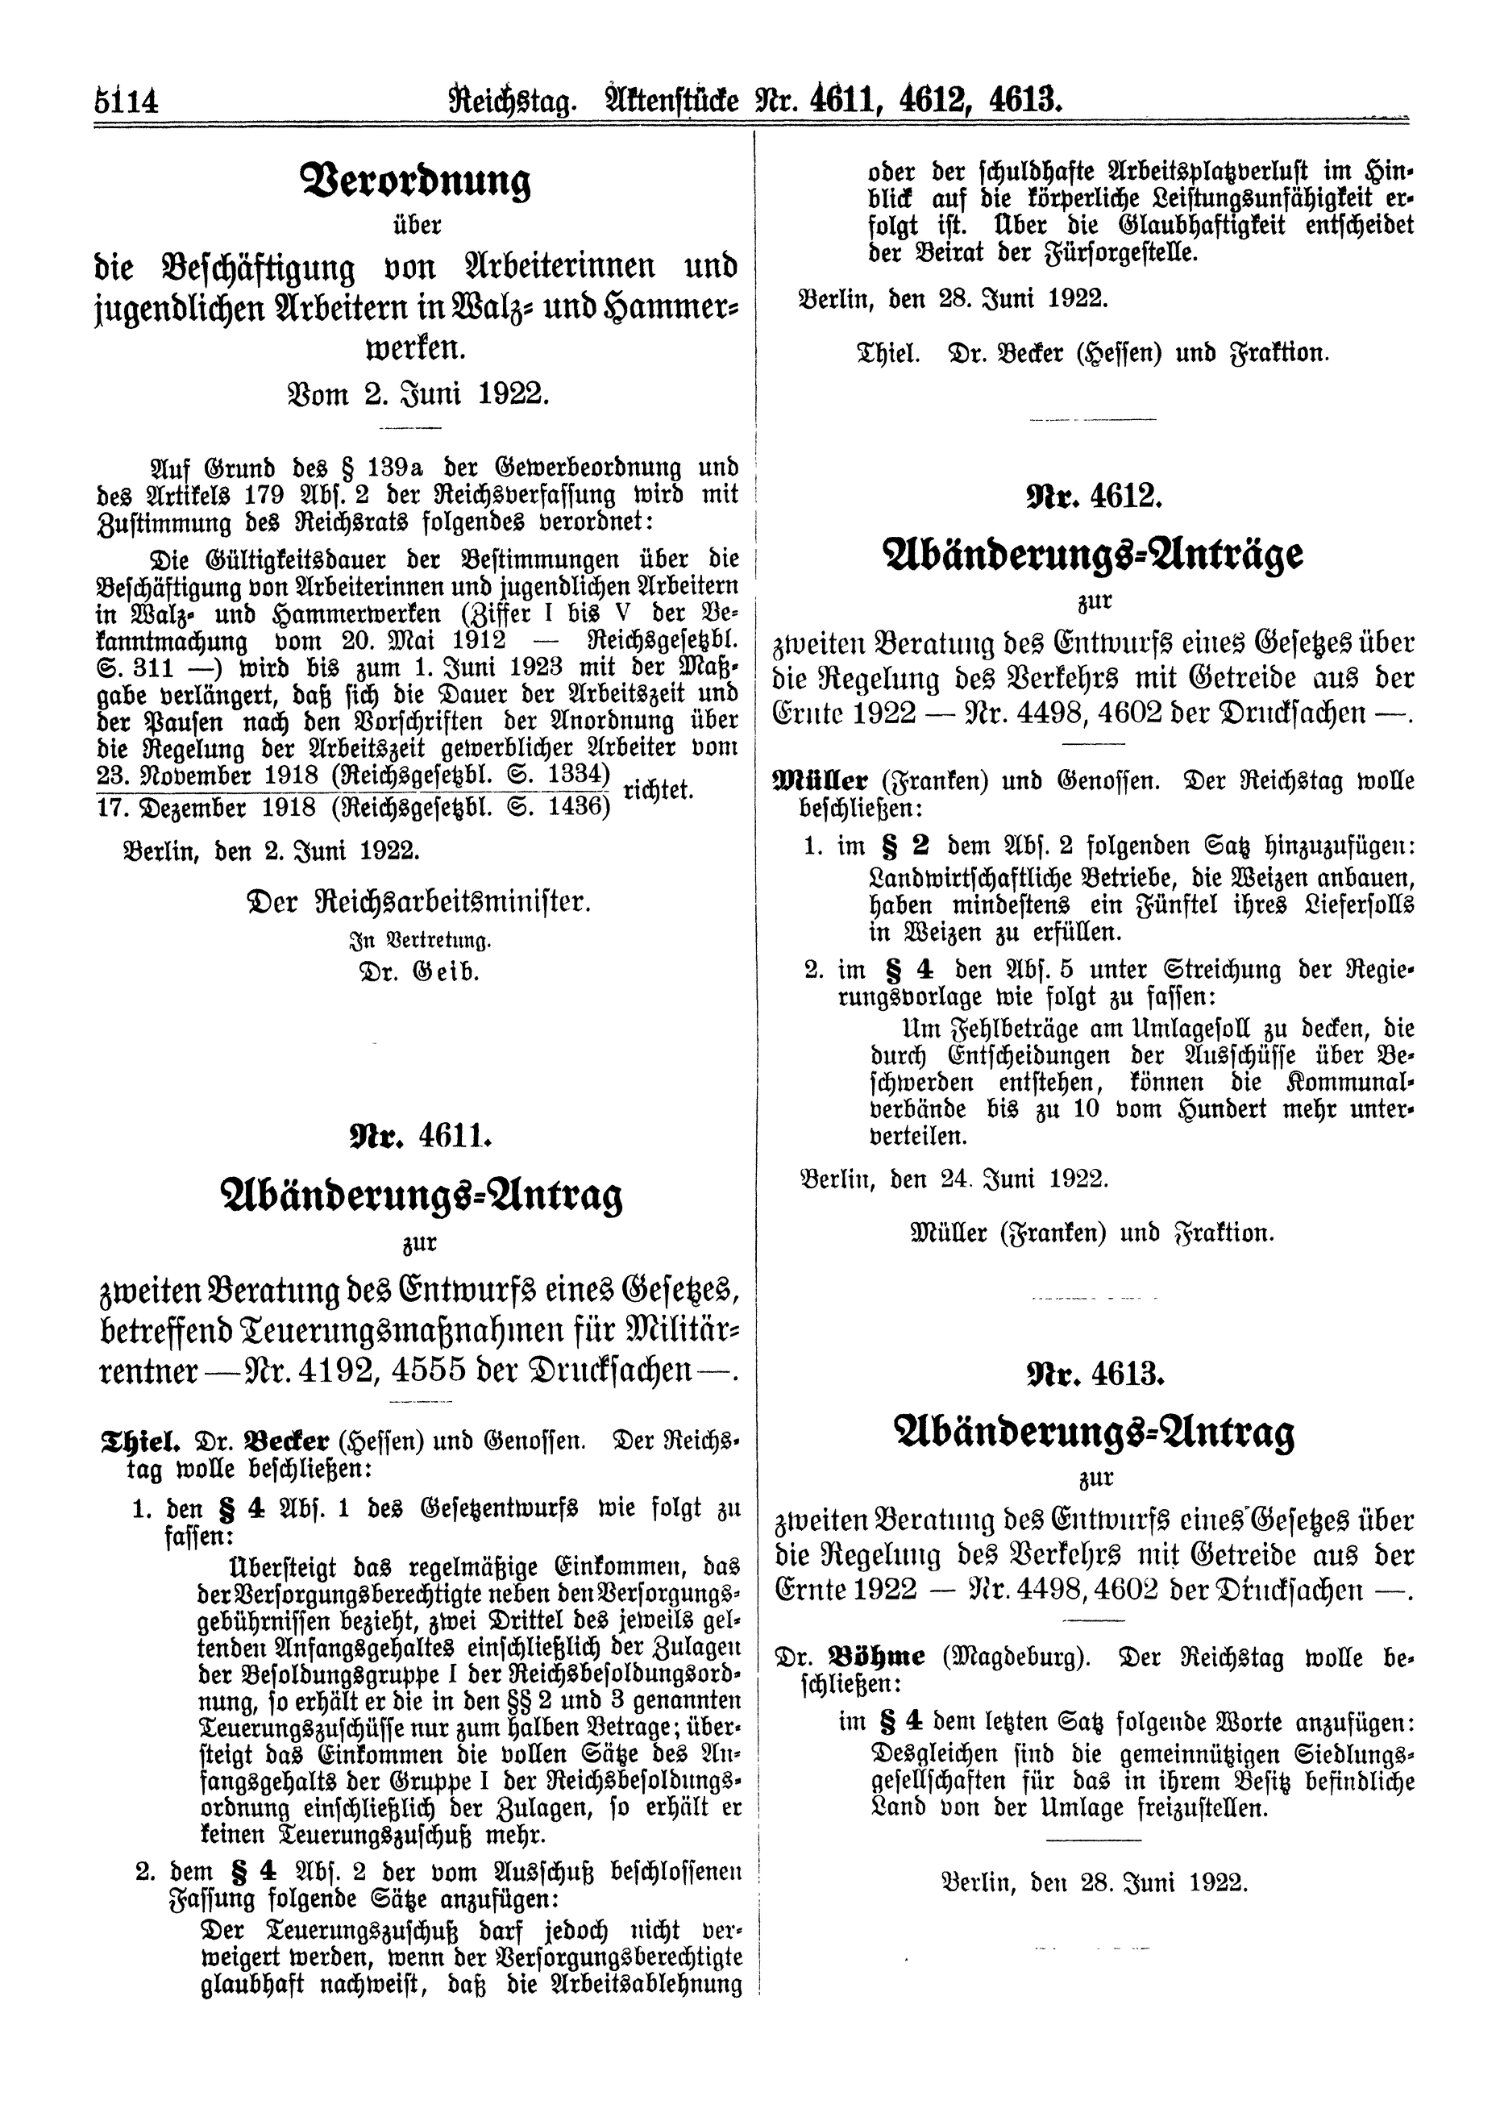 Scan of page 5114